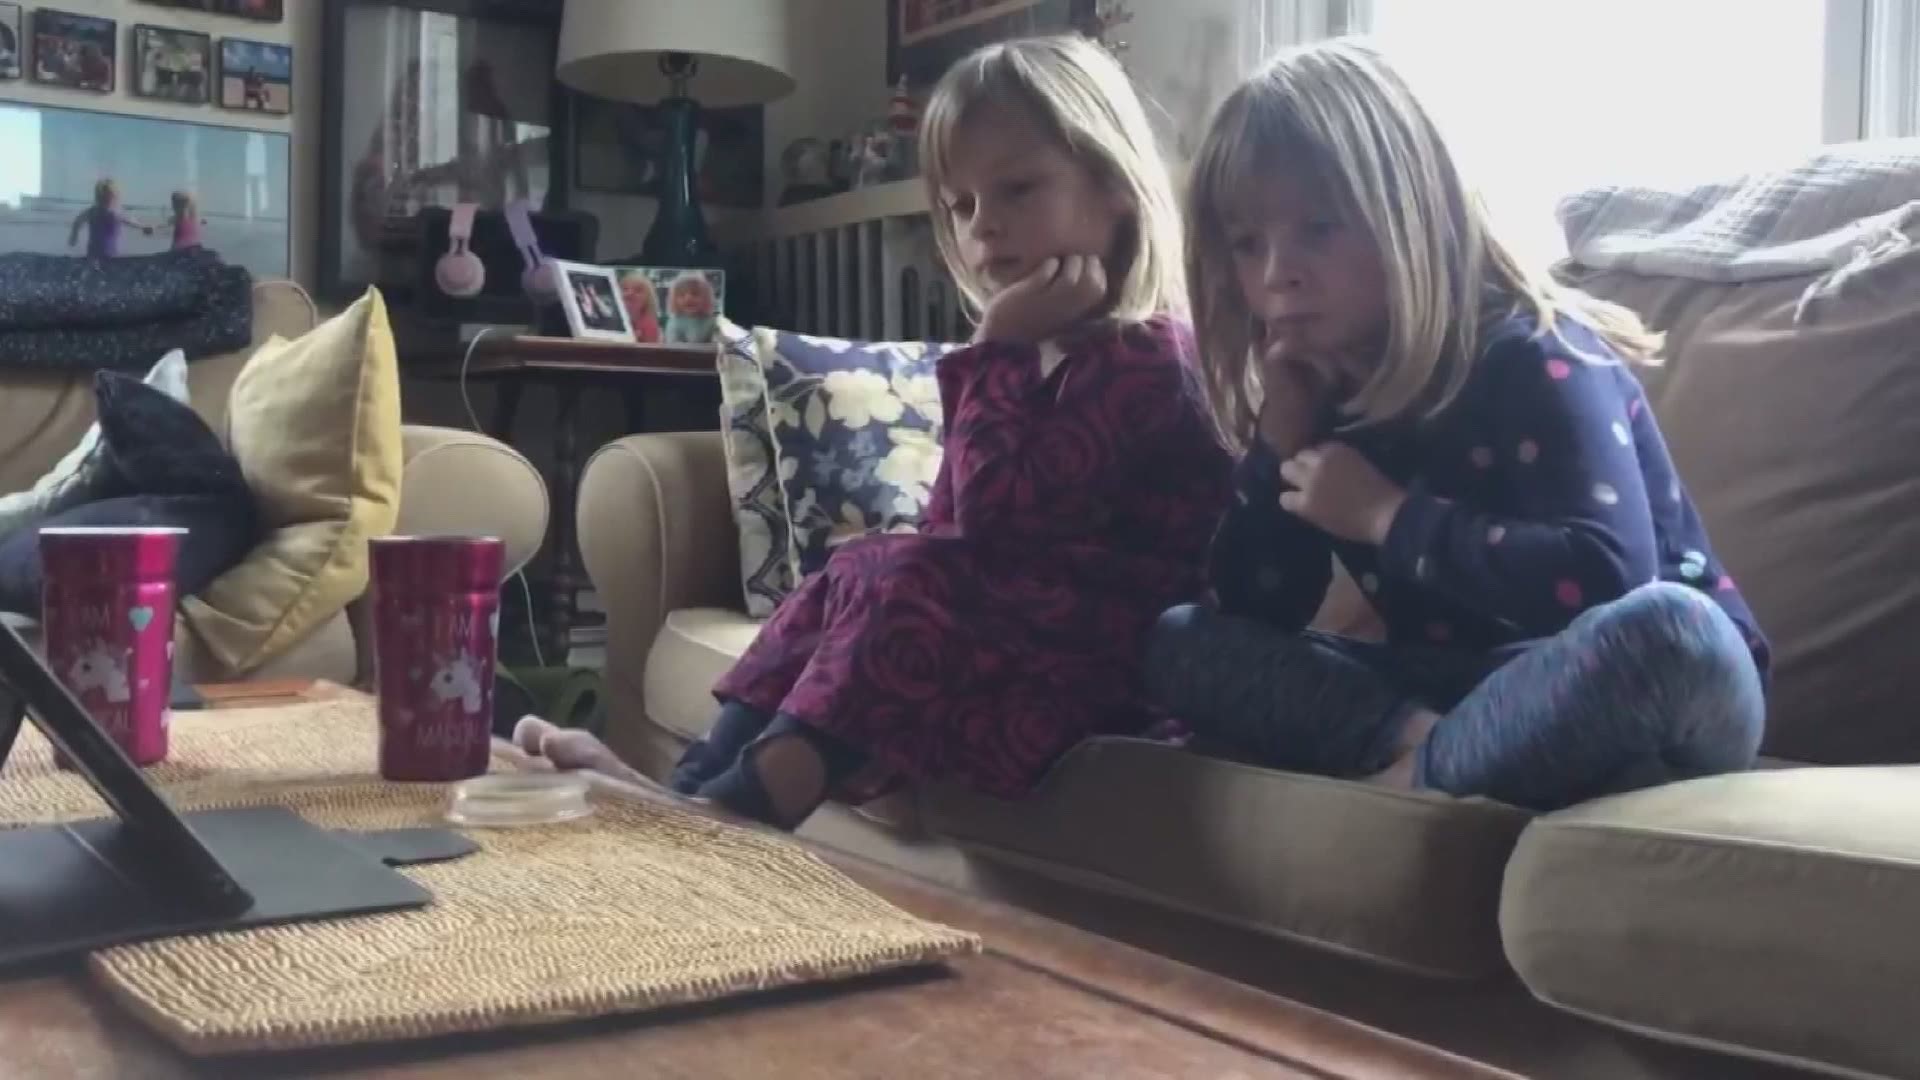 Grandmother reads Harry Potter books to her grandchildren as a way to stay connected to them during the pandemic.